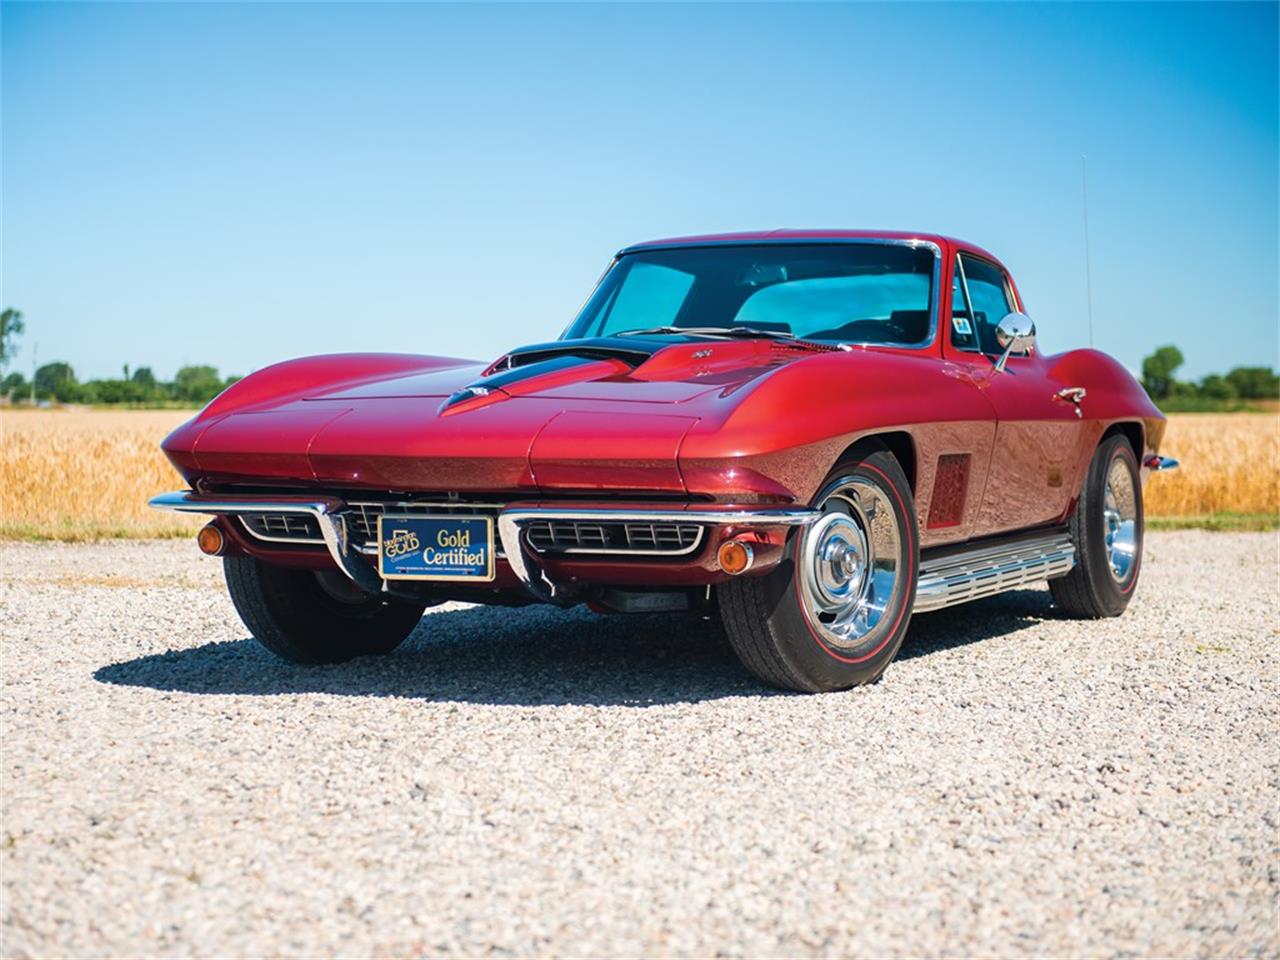 1967 Chevrolet Corvette Sting Ray 427/435 Coupe for Sale | ClassicCars ...